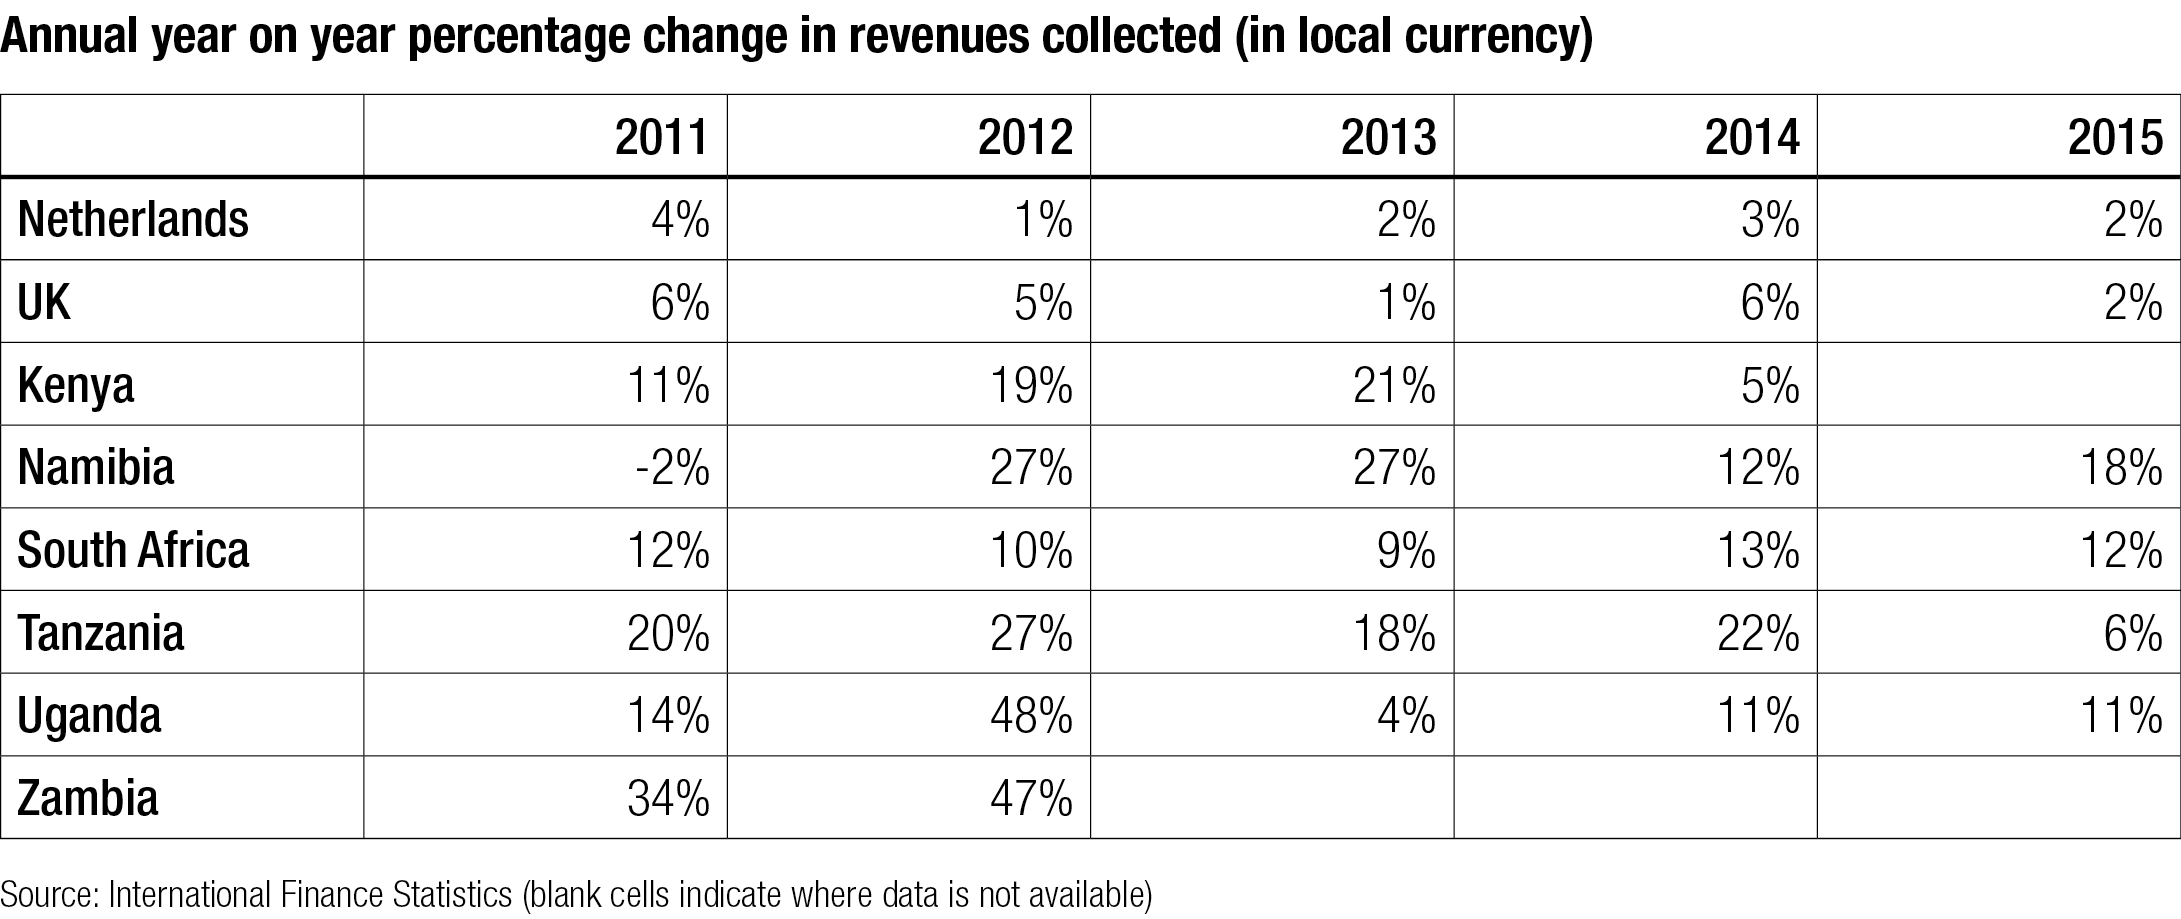 Annual year on year percentage change in revenues collected (in local currency)